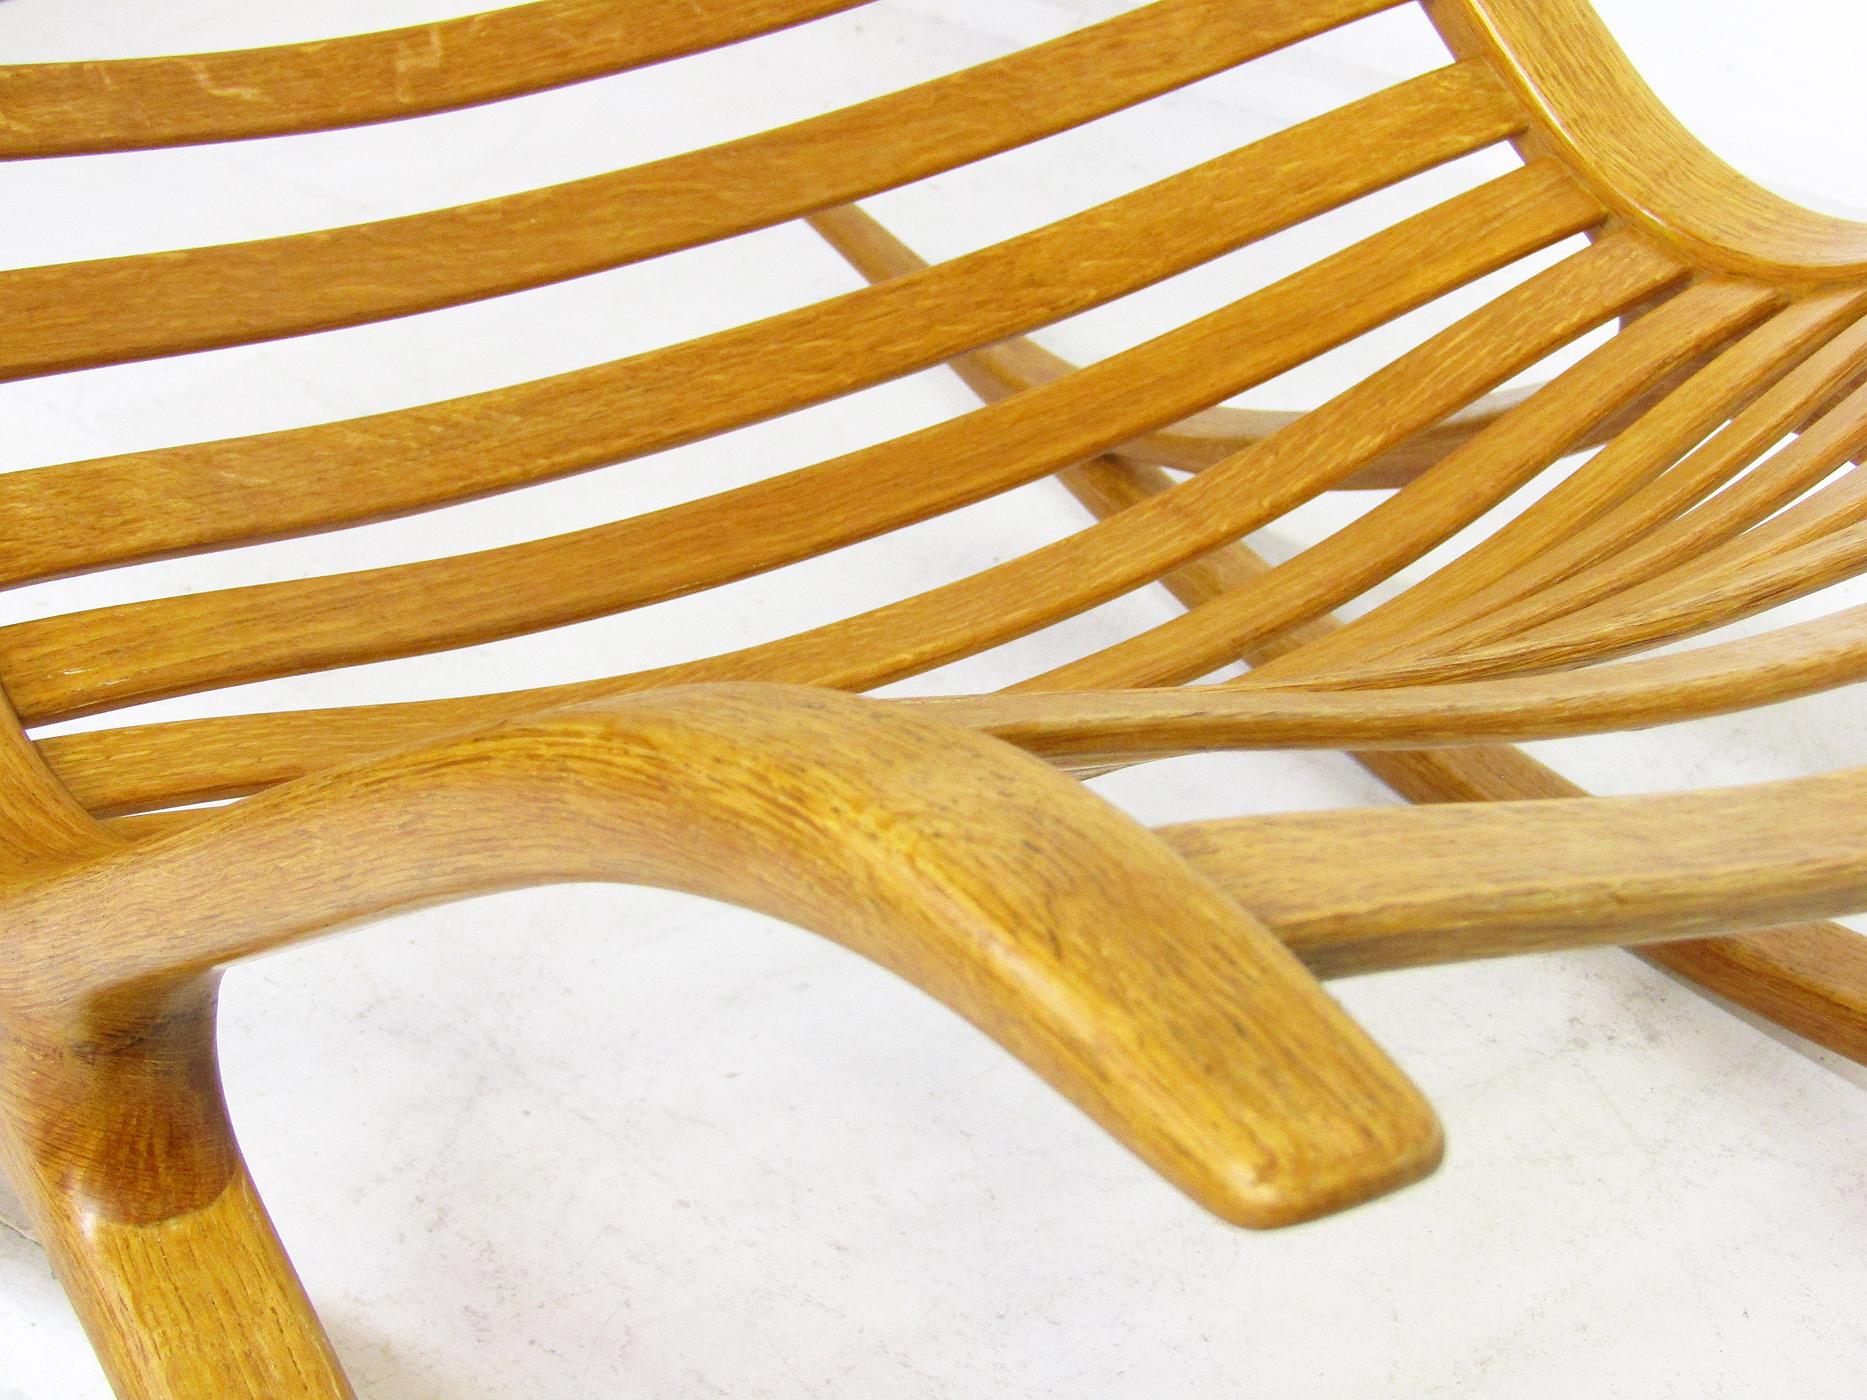 Sculptural 1960s Wishbone Rocking Chair In Oak By Robin Williams In Good Condition For Sale In Shepperton, Surrey